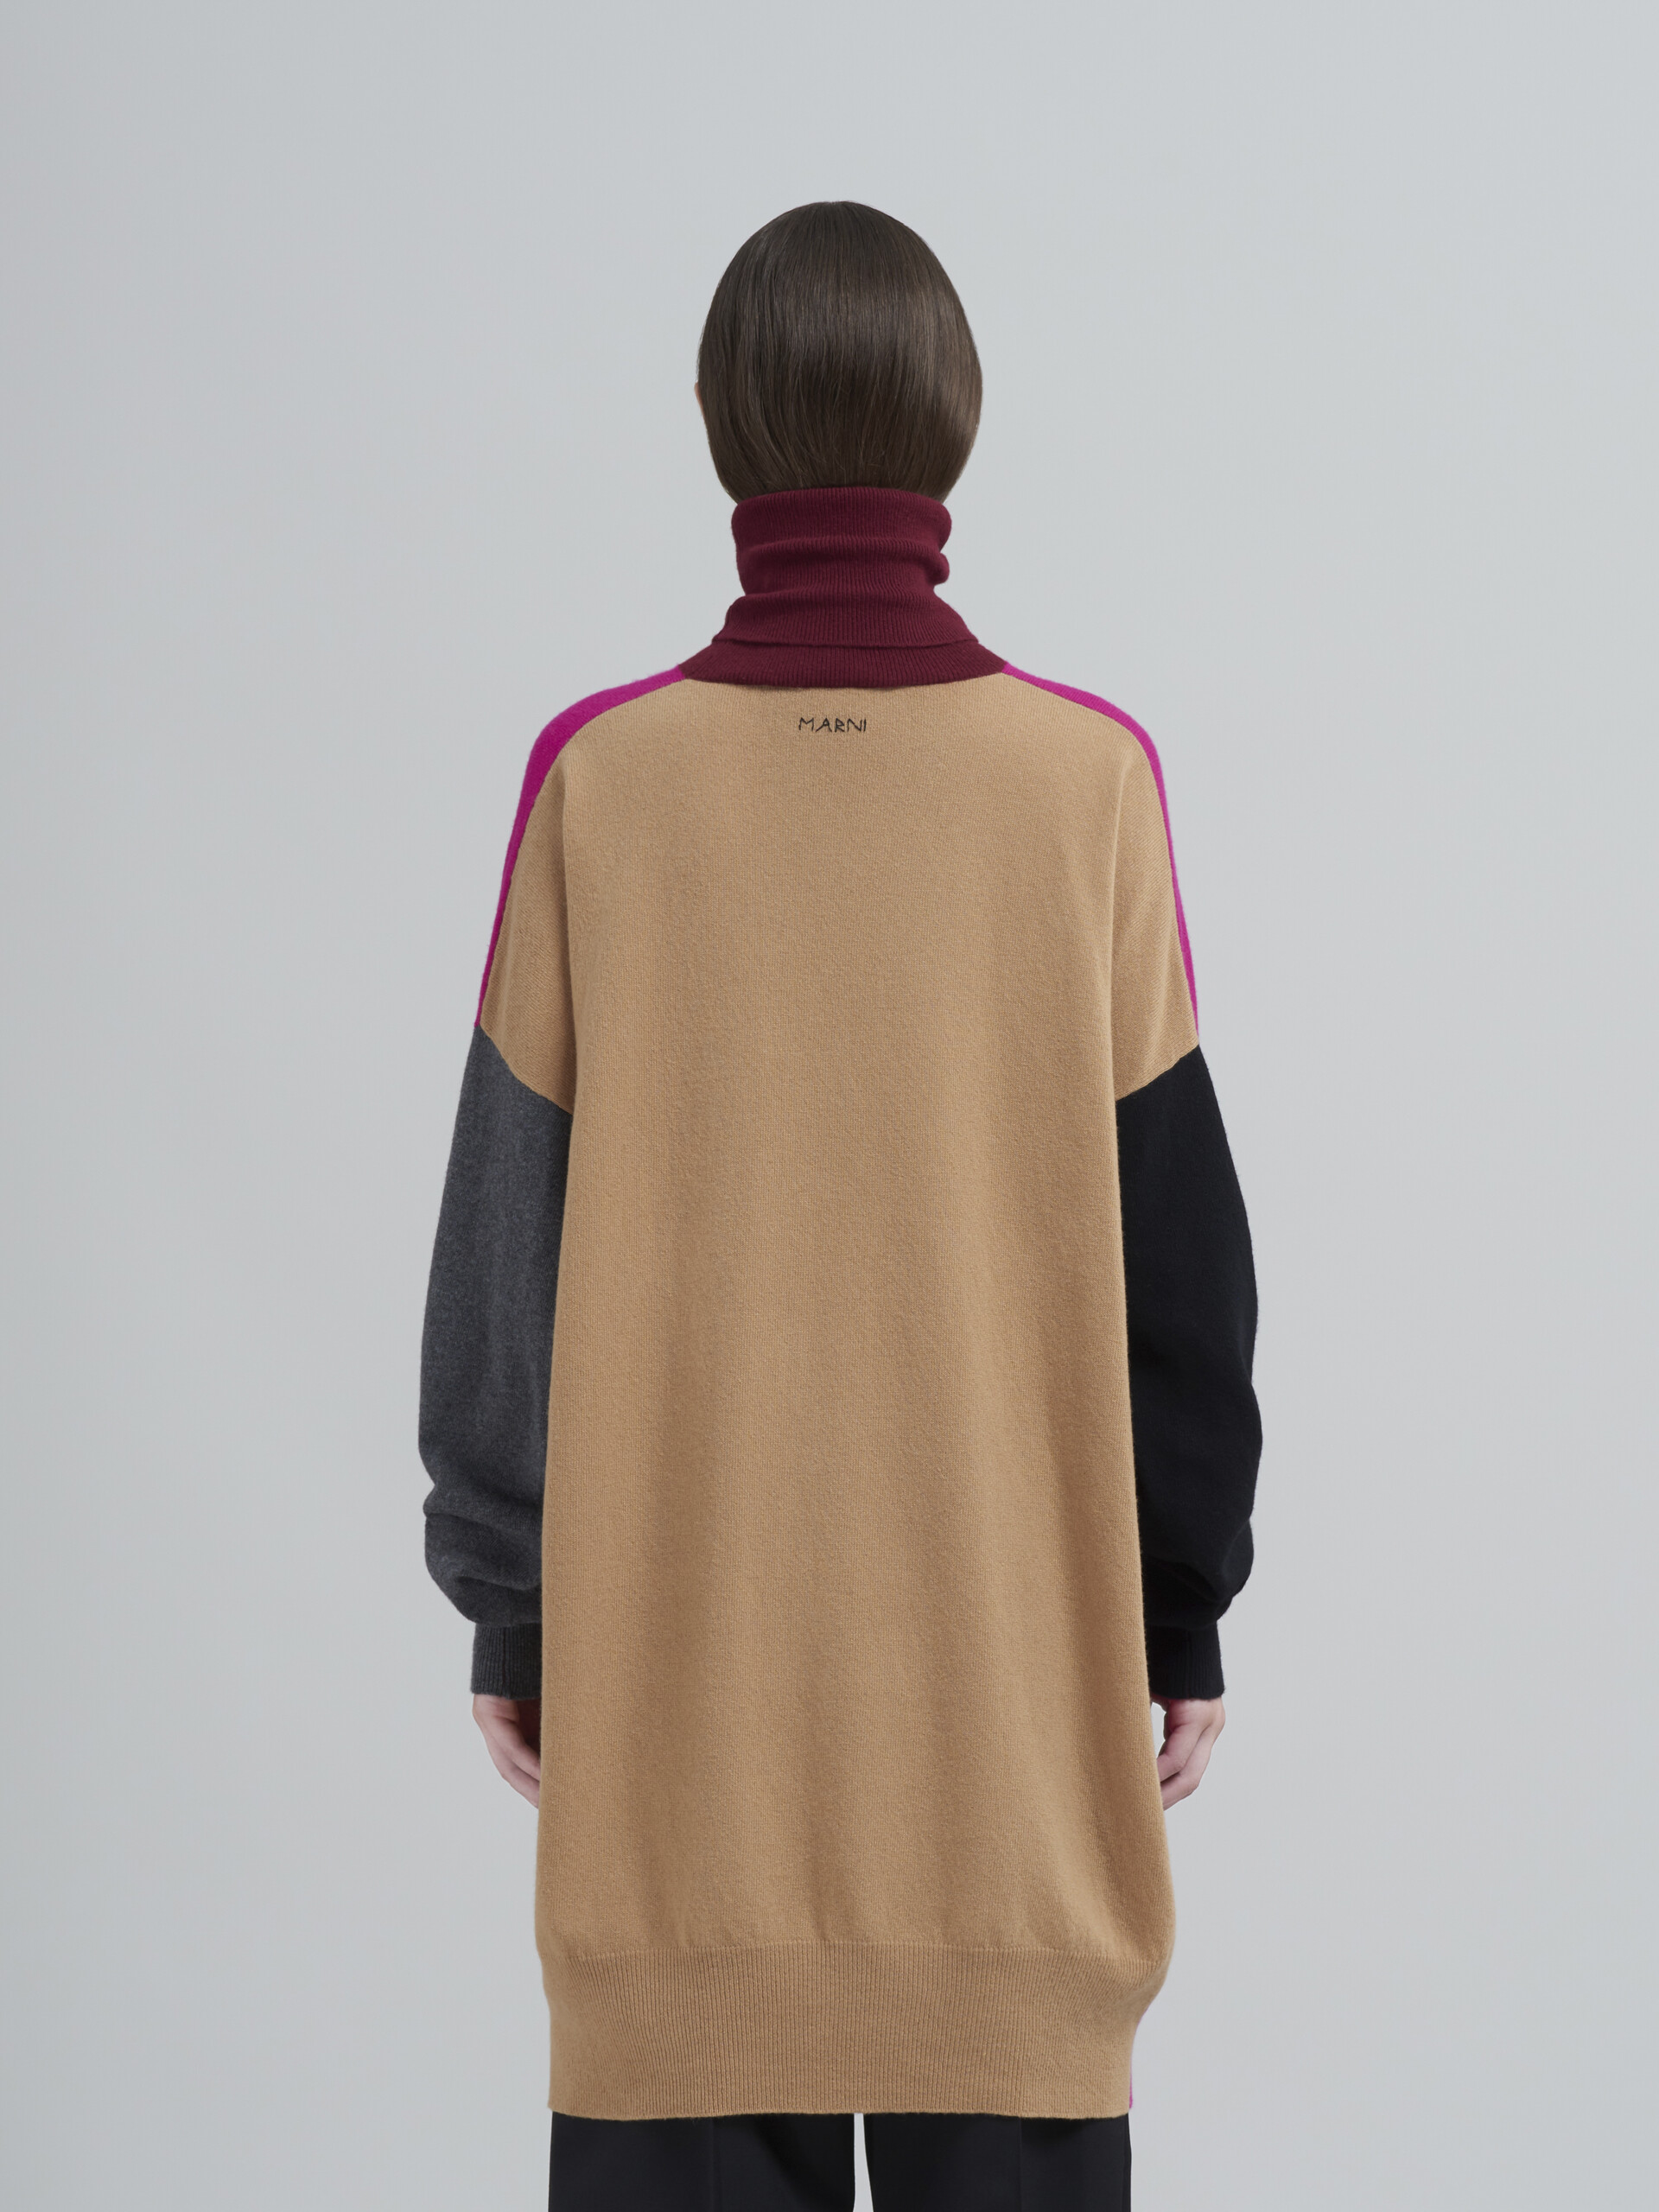 Colourblock wool and cashmere sweater - Pullovers - Image 3